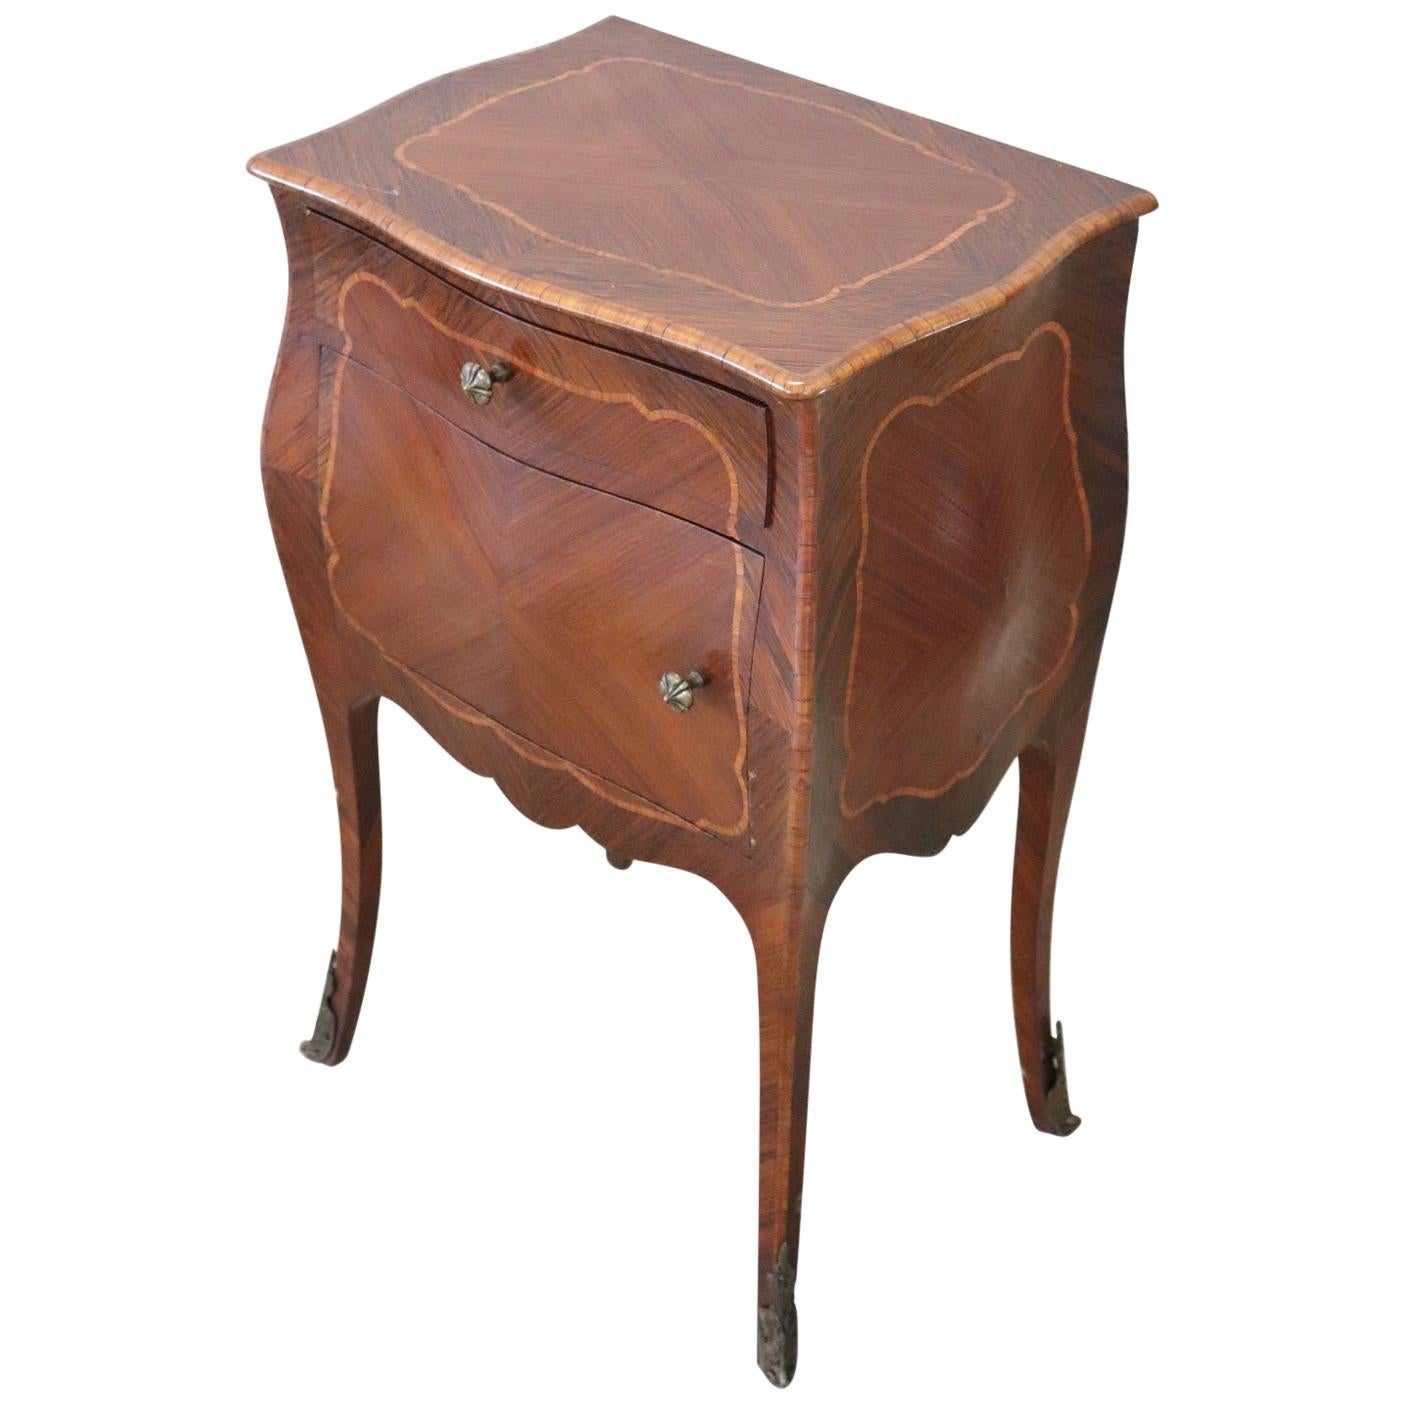 20th Century French Louis XV Style Inlaid Rosewood Side Table or Nightstand